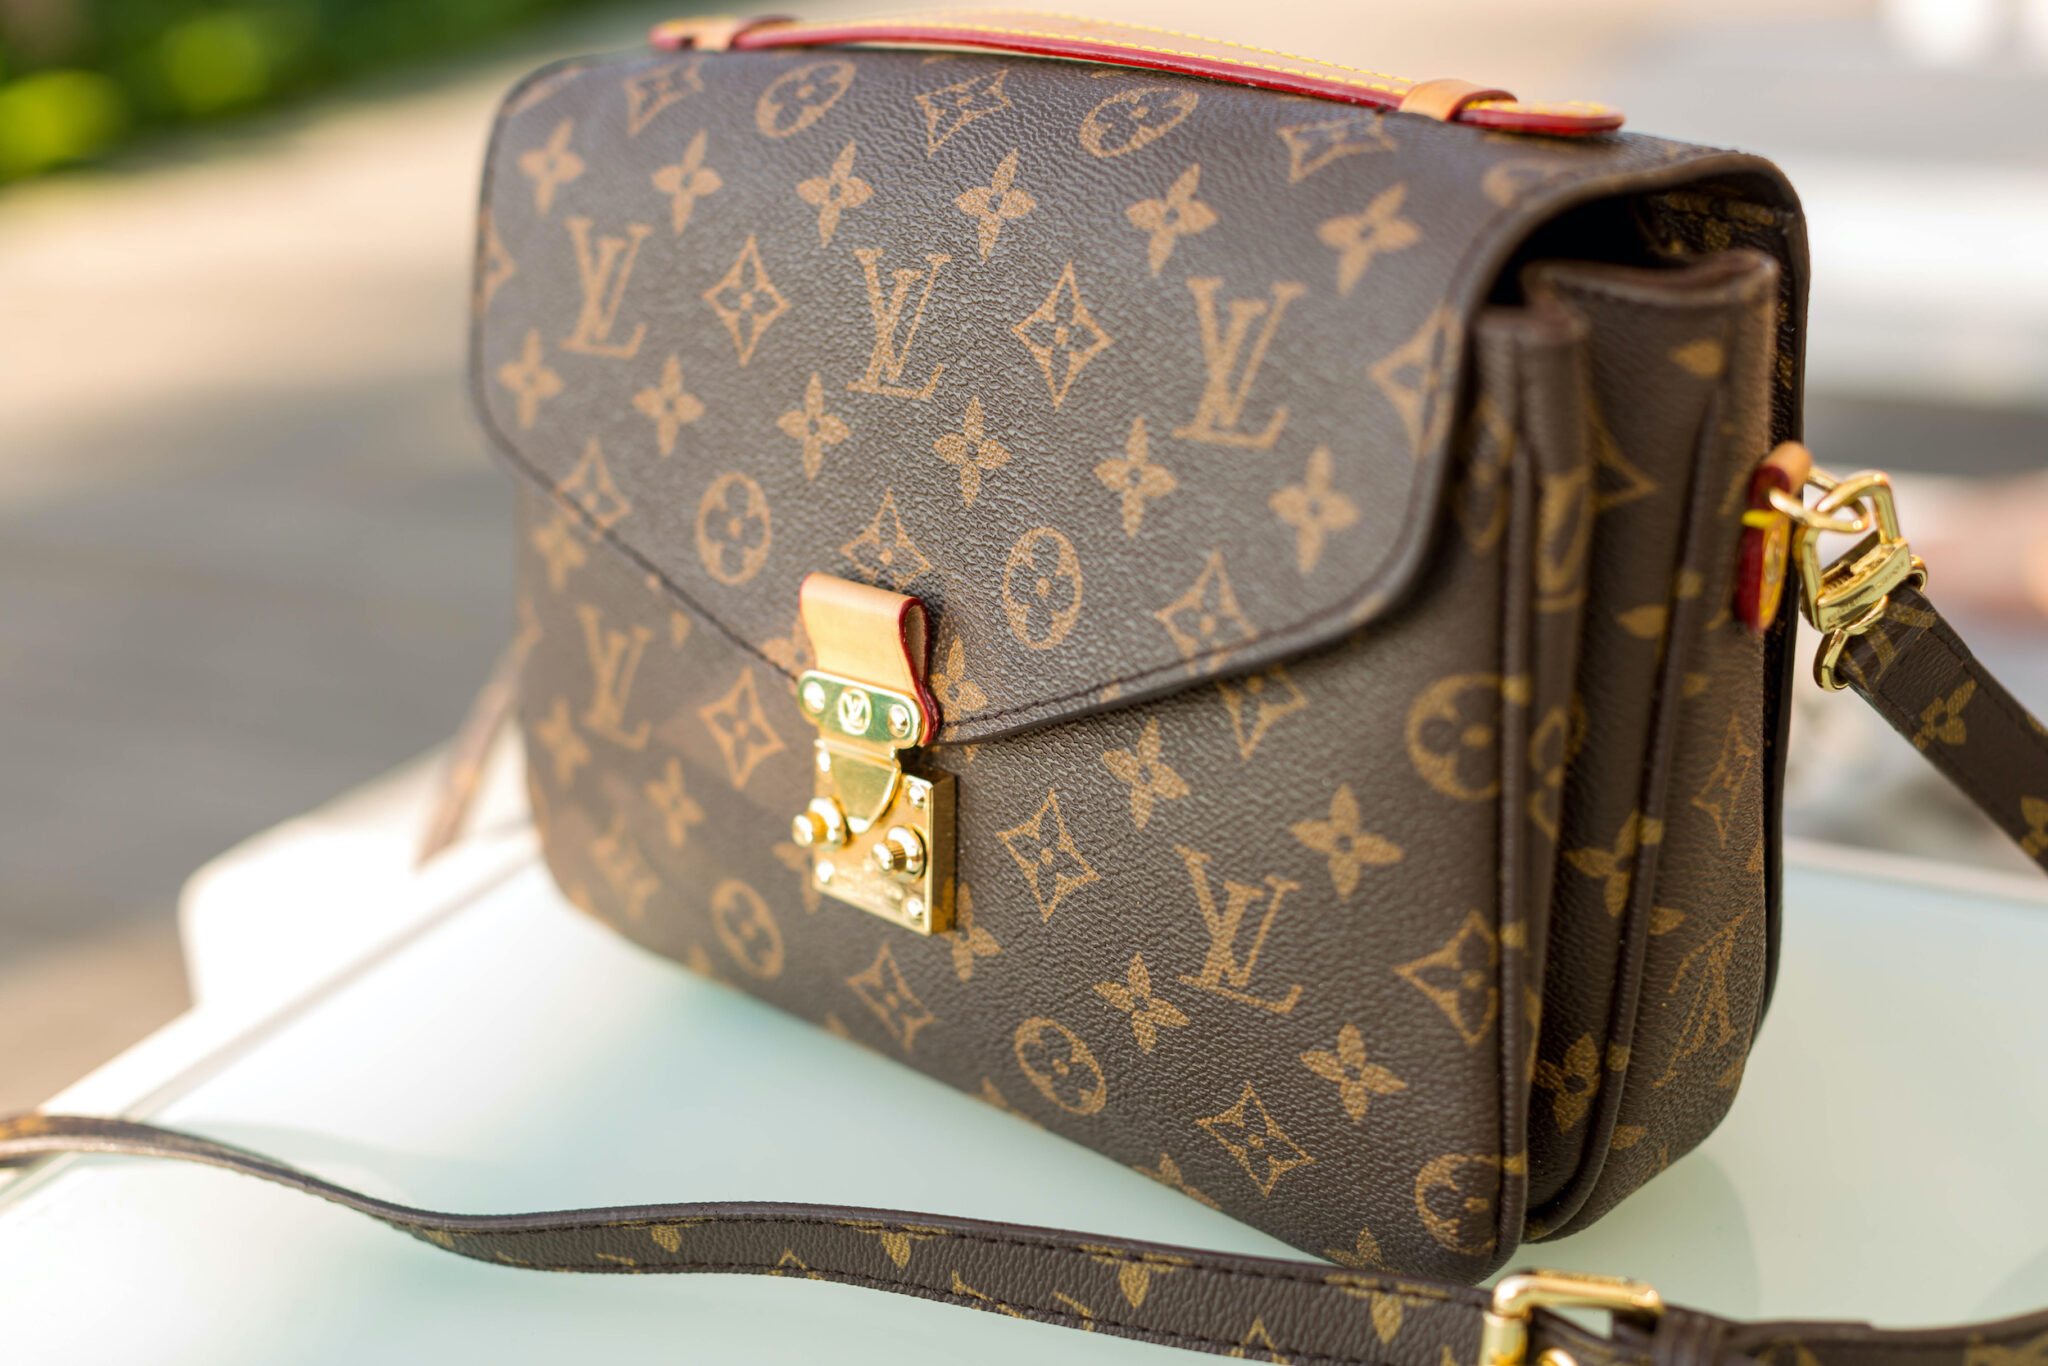 What's The Most Iconic Louis Vuitton Bag? - Luxury Viewer